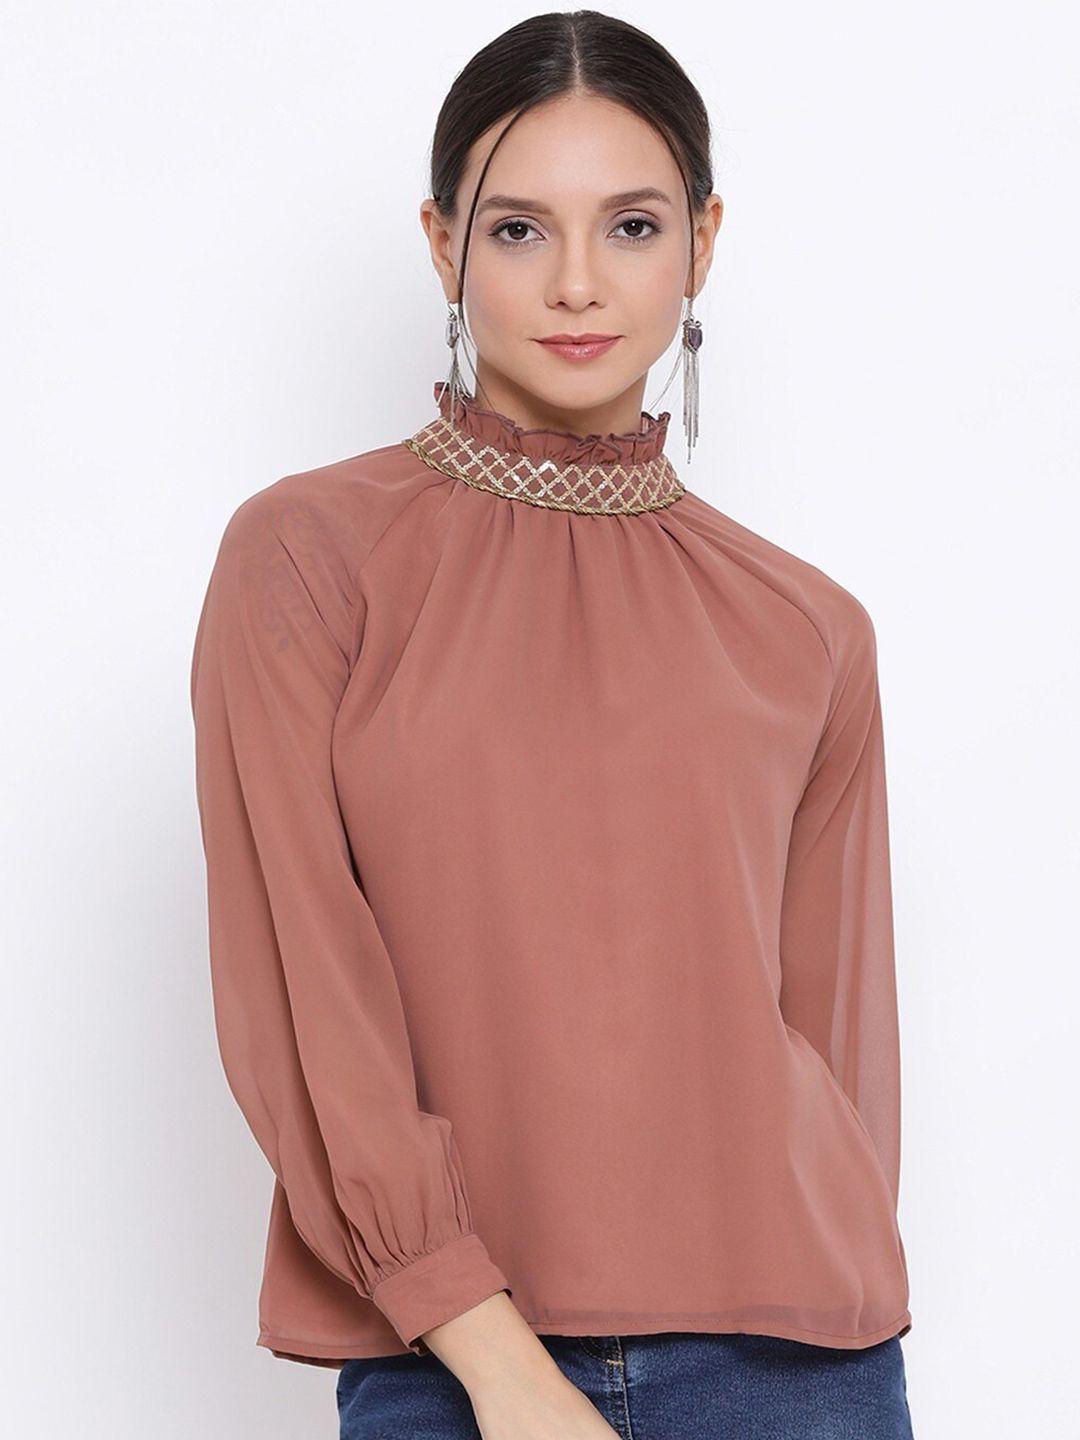 baesd-sequinned-embellished-high-neck-cuffed-sleeves-top